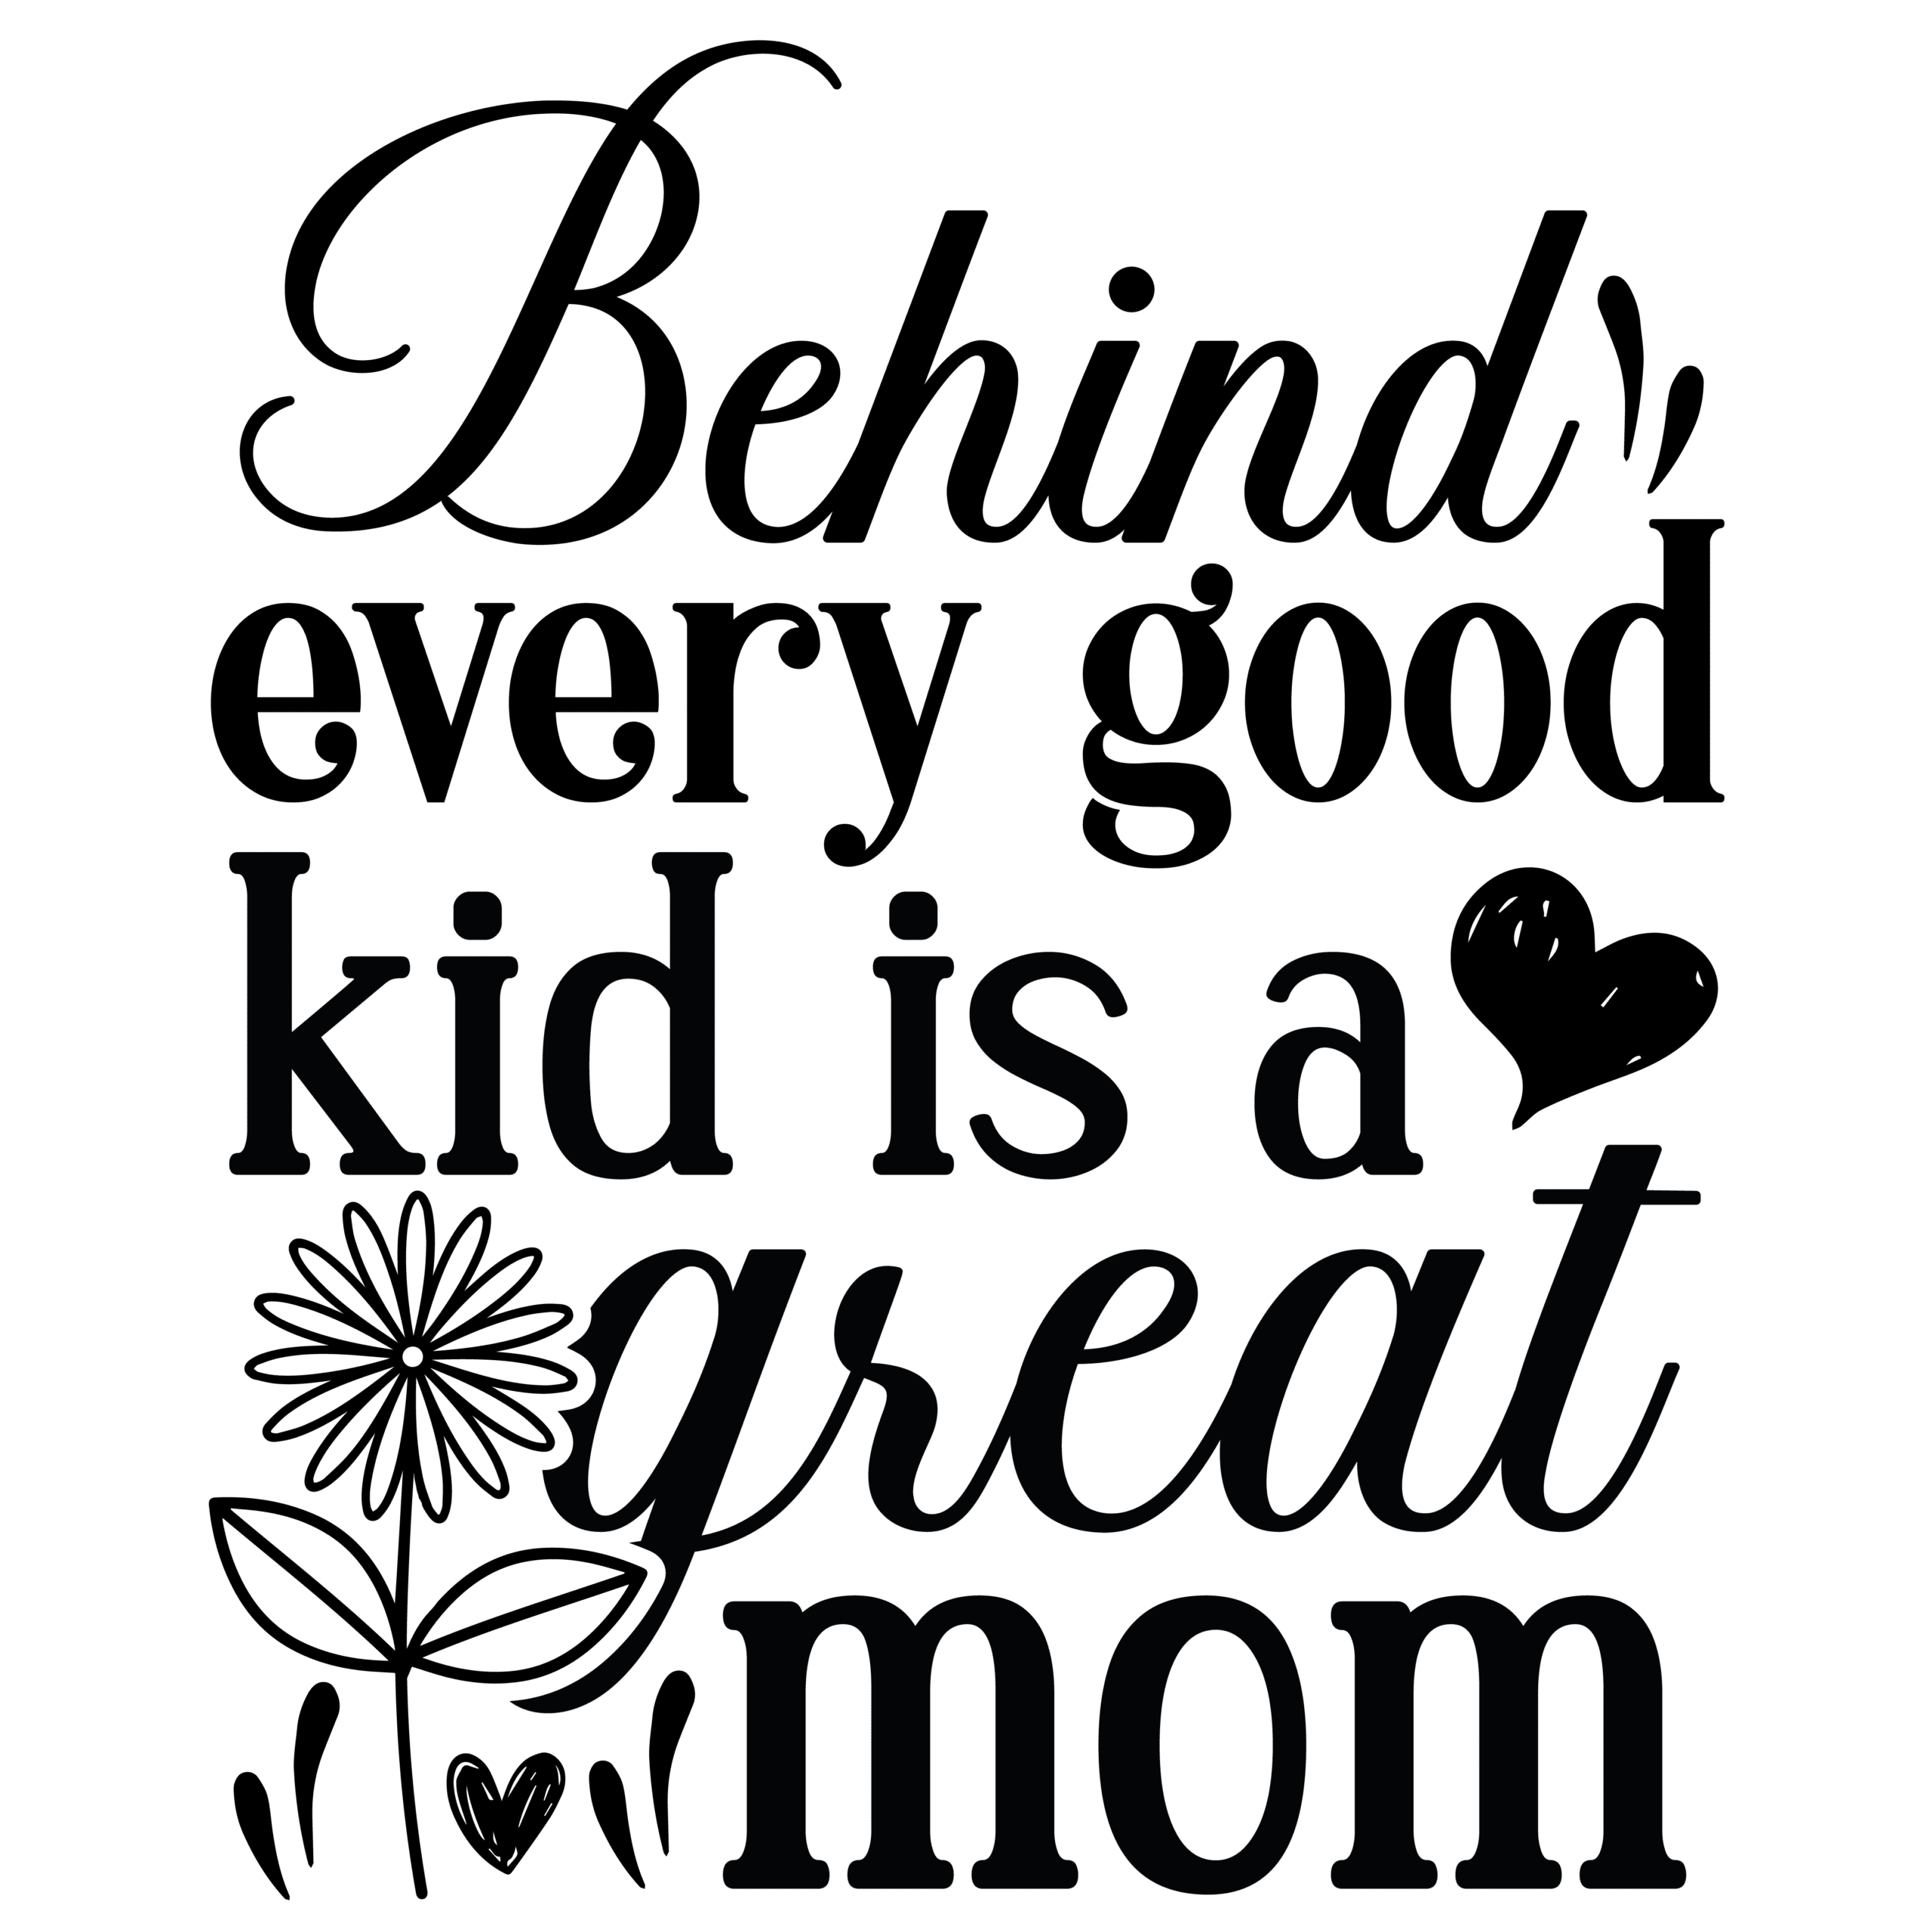 Behind every good kid is a great mom-01